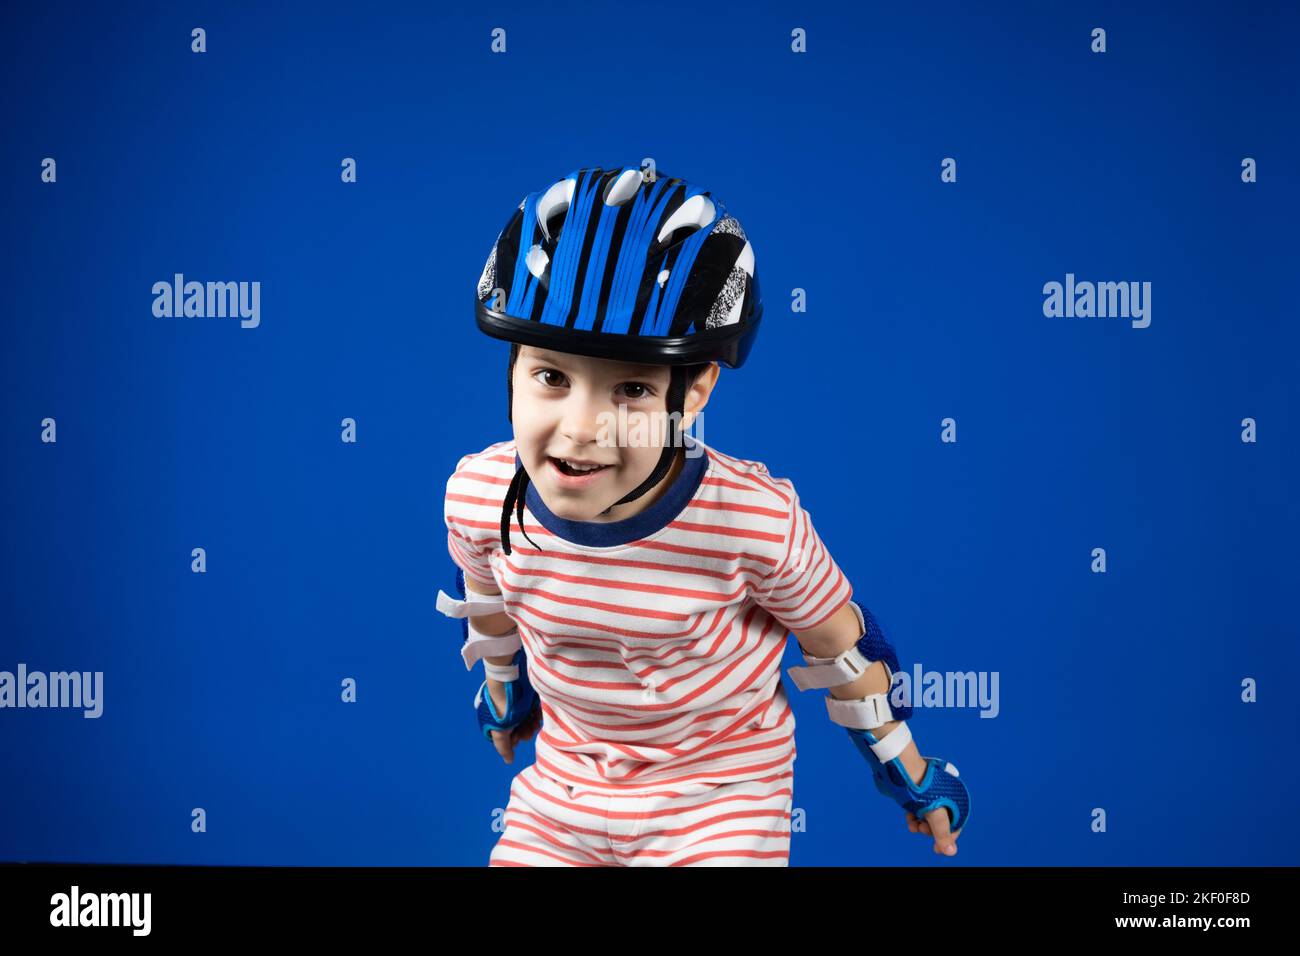 A happy boy in a protective helmet, elbow pads and gloves on a blue background. Protection when riding a bicycle, skateboard, roller skate Stock Photo